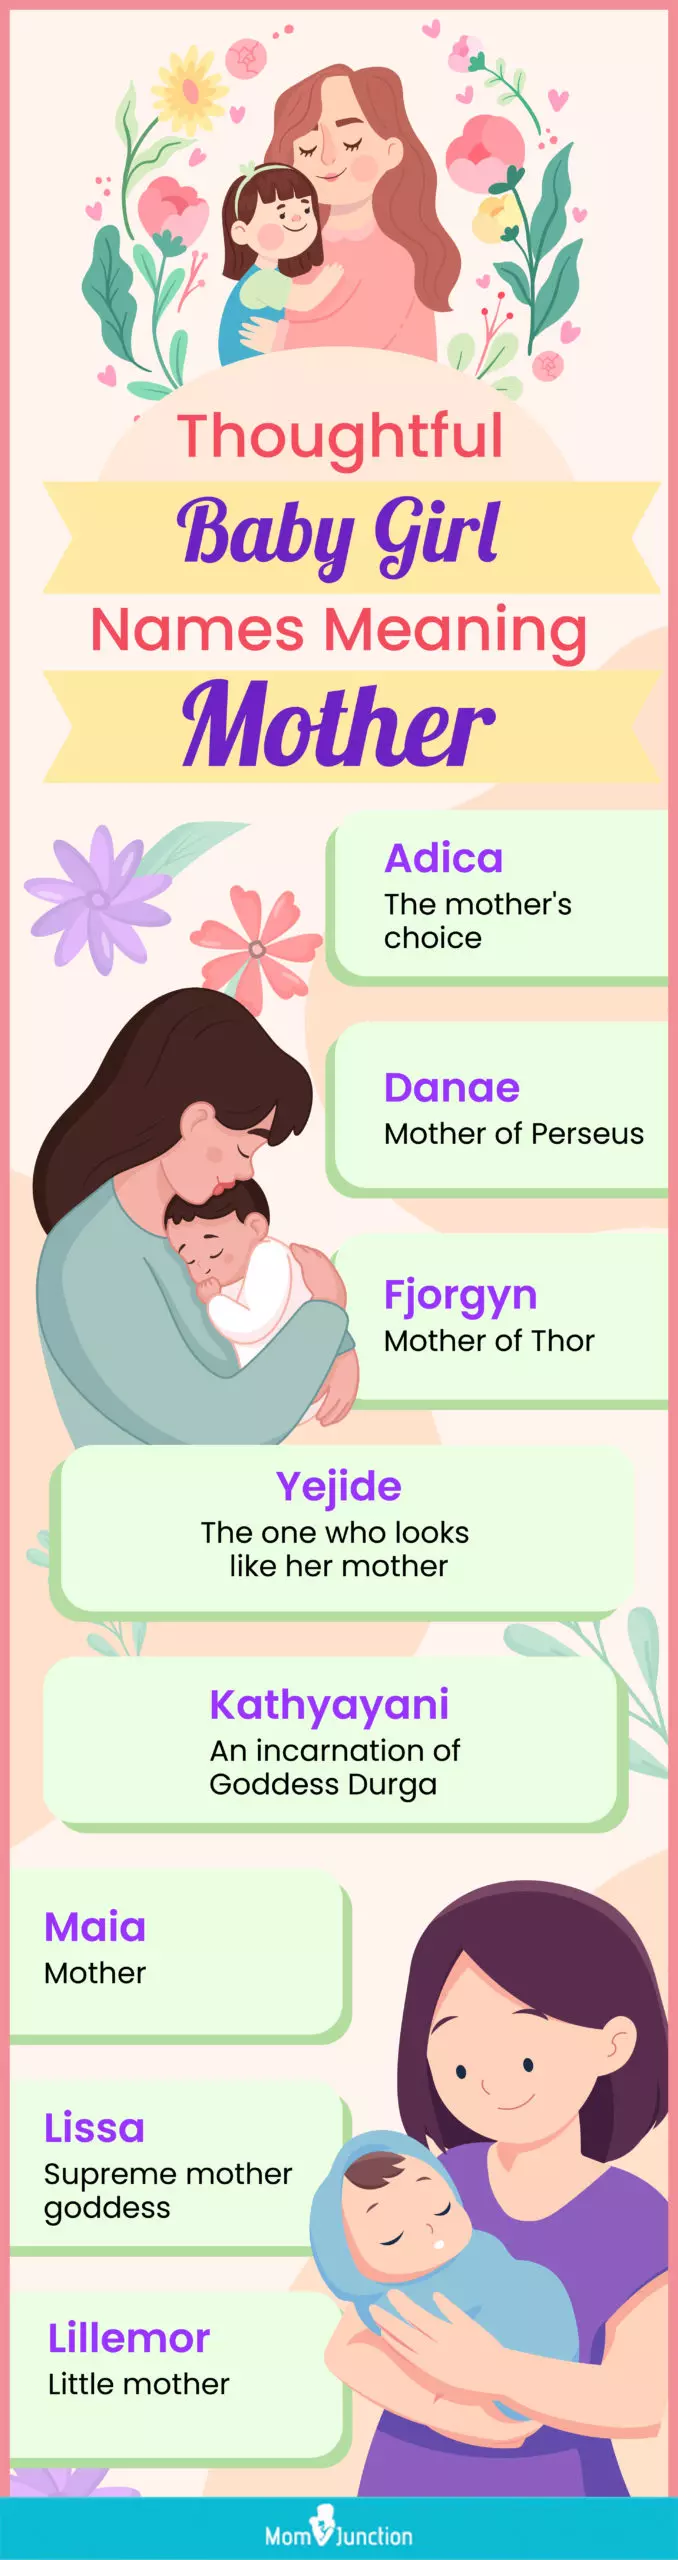 thoughtful baby girl names meaning mother (infographic)